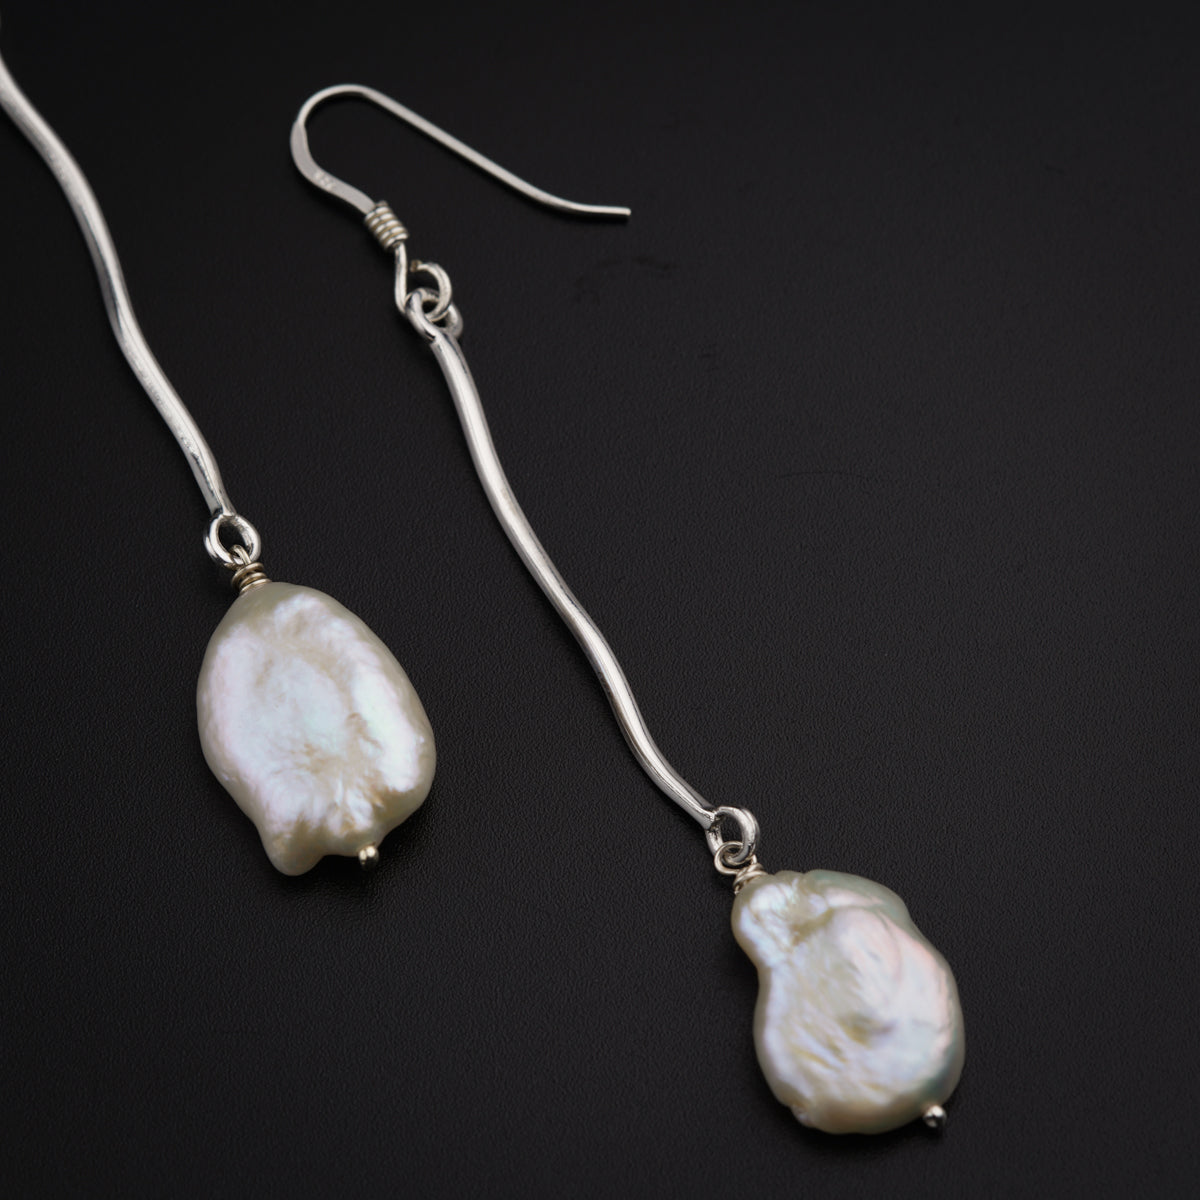 a pair of earrings with a white pearl